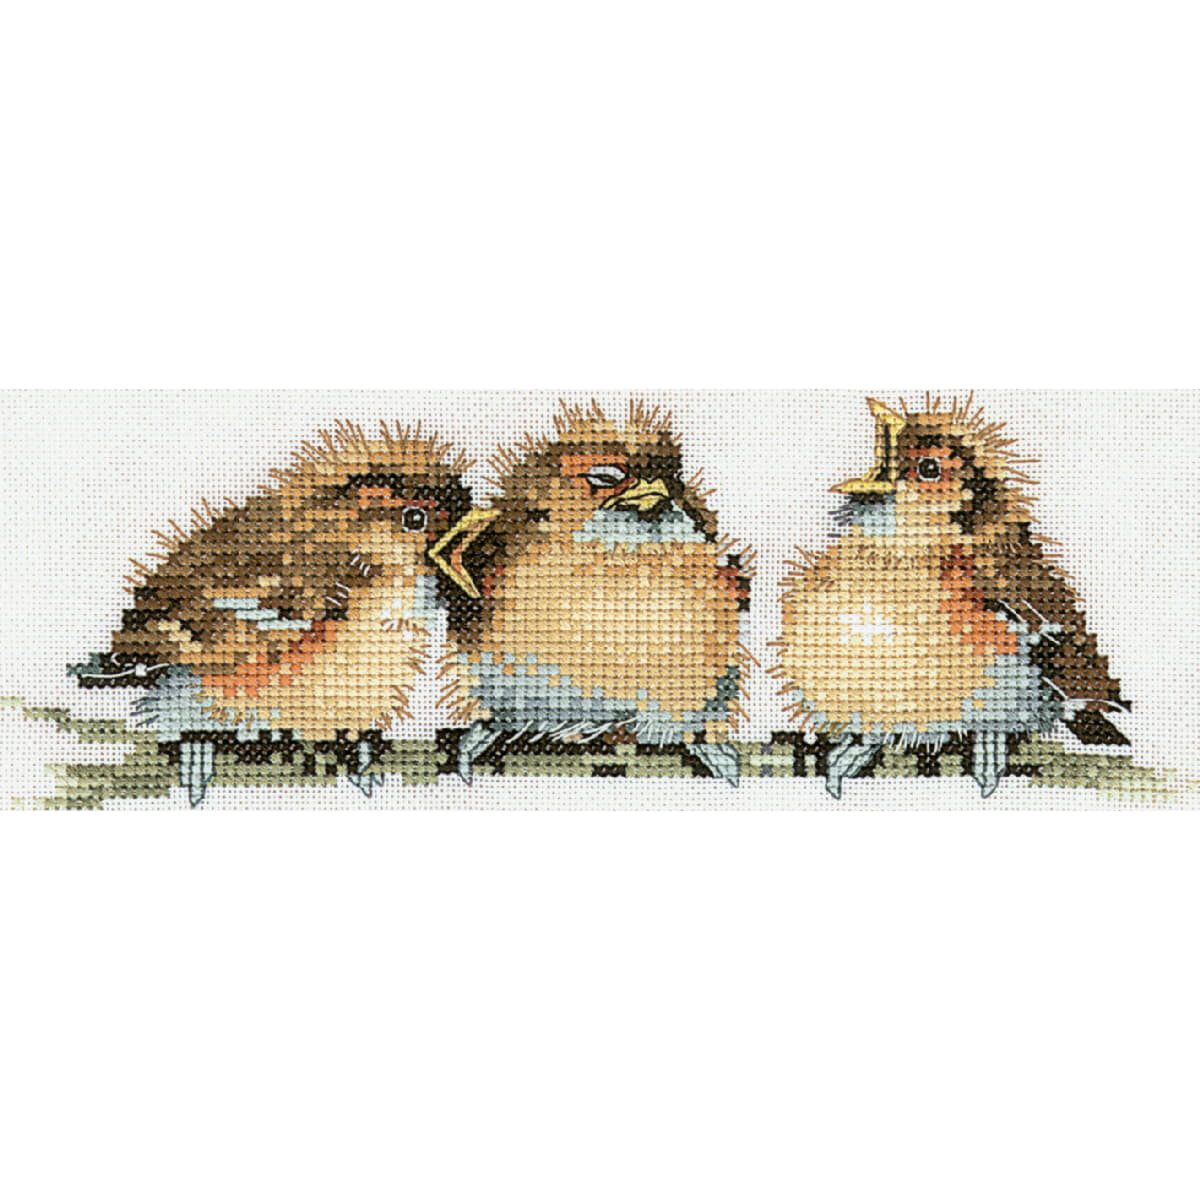 Heritage counted cross stitch kit Aida "Threes a...